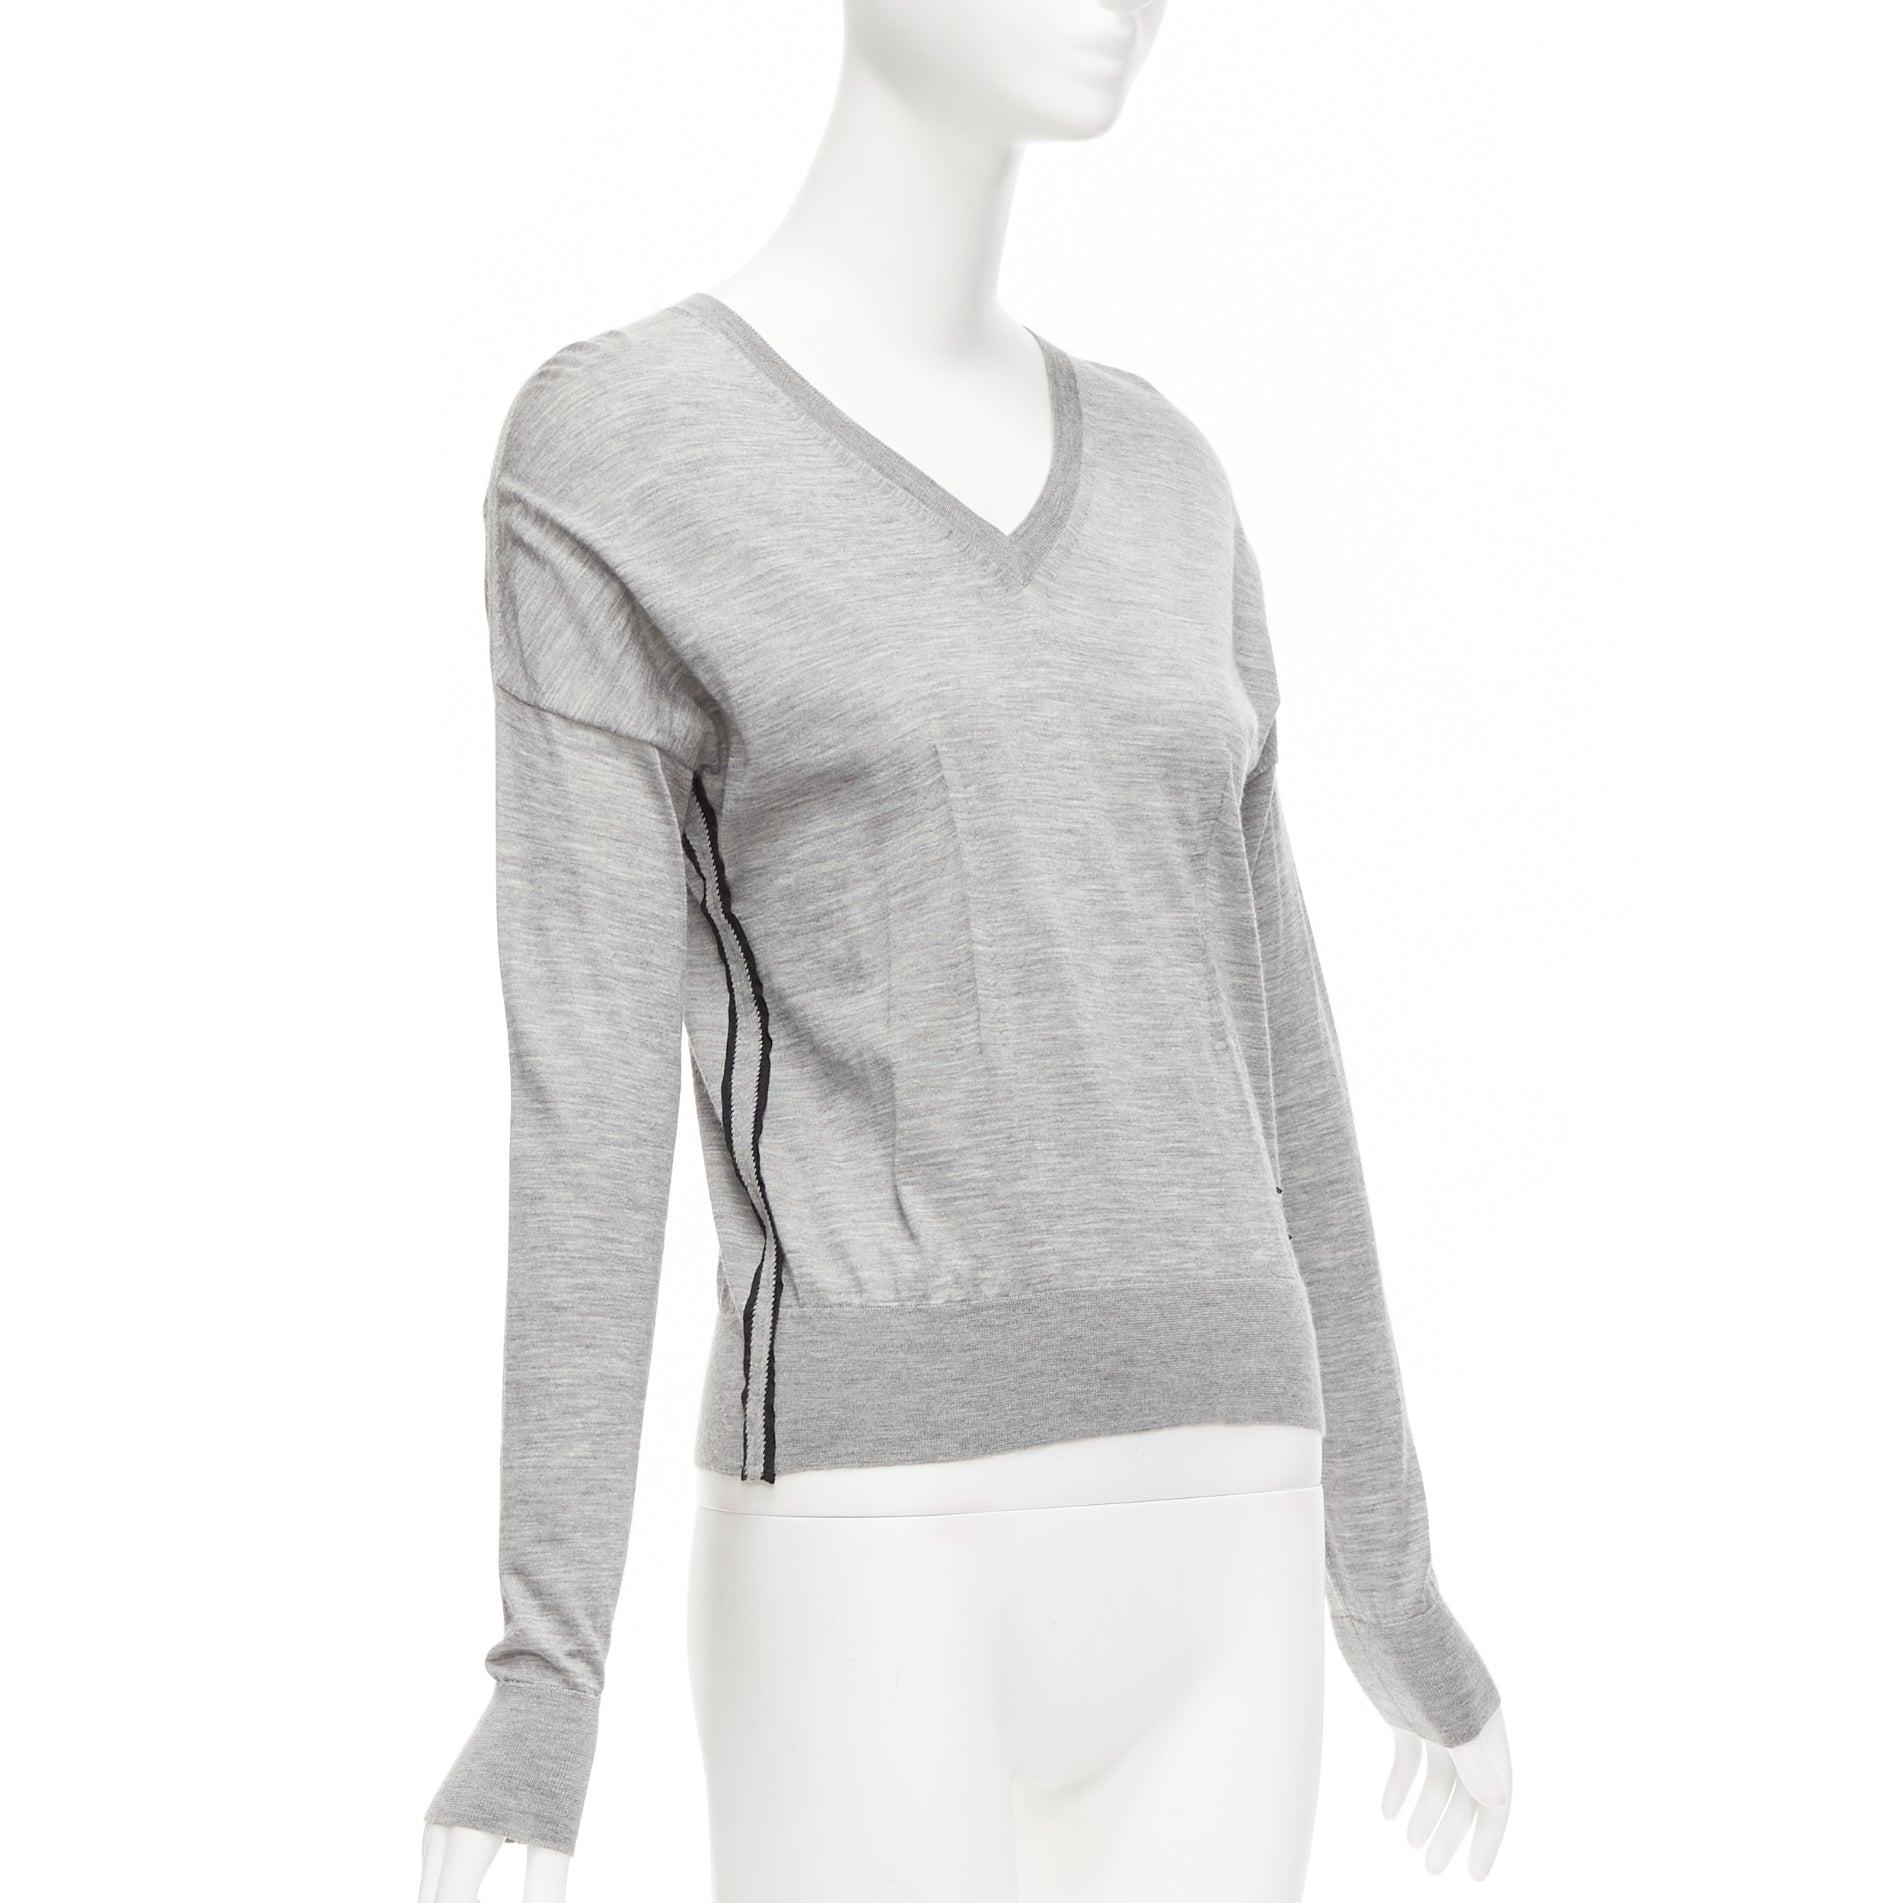 LOUIS VUITTON grey soft knit black beaded LV logo V neck pullover top In Excellent Condition For Sale In Hong Kong, NT